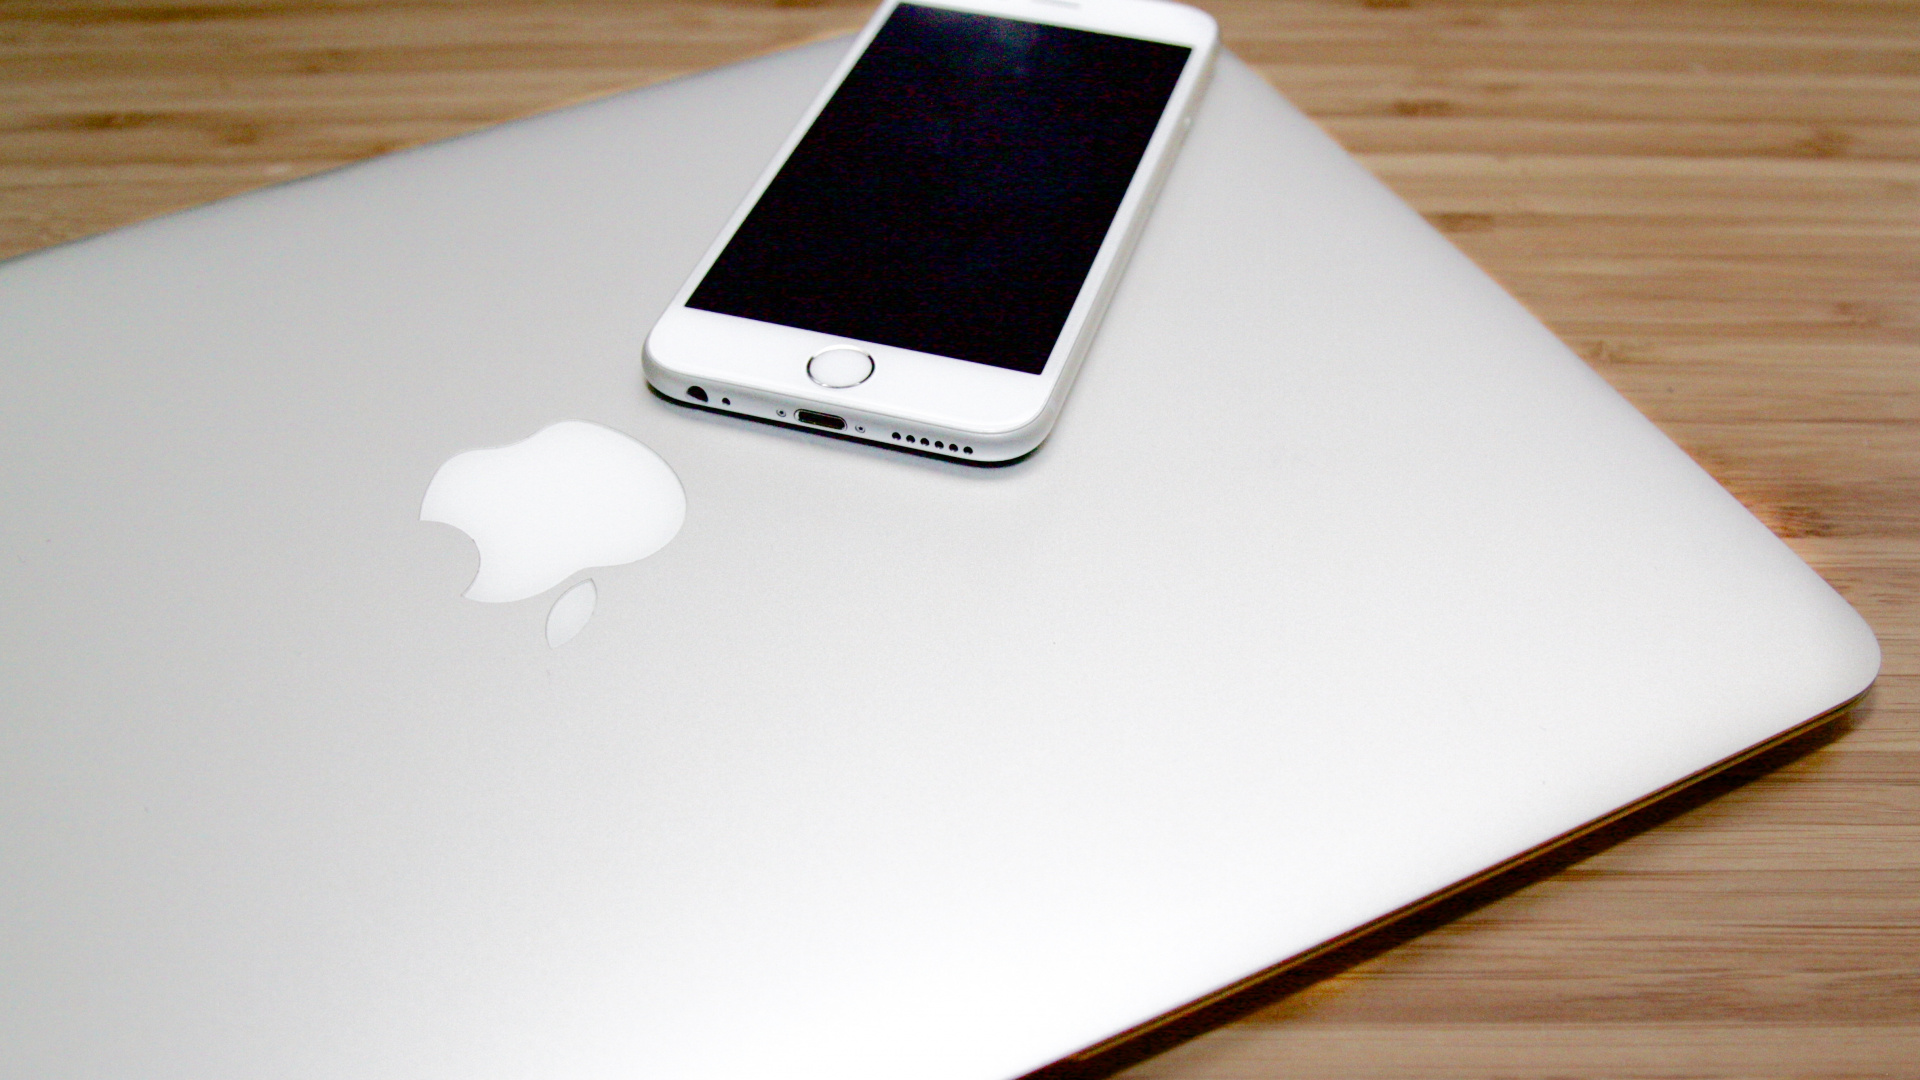 Silver Iphone 6 on Macbook. Wallpaper in 1920x1080 Resolution